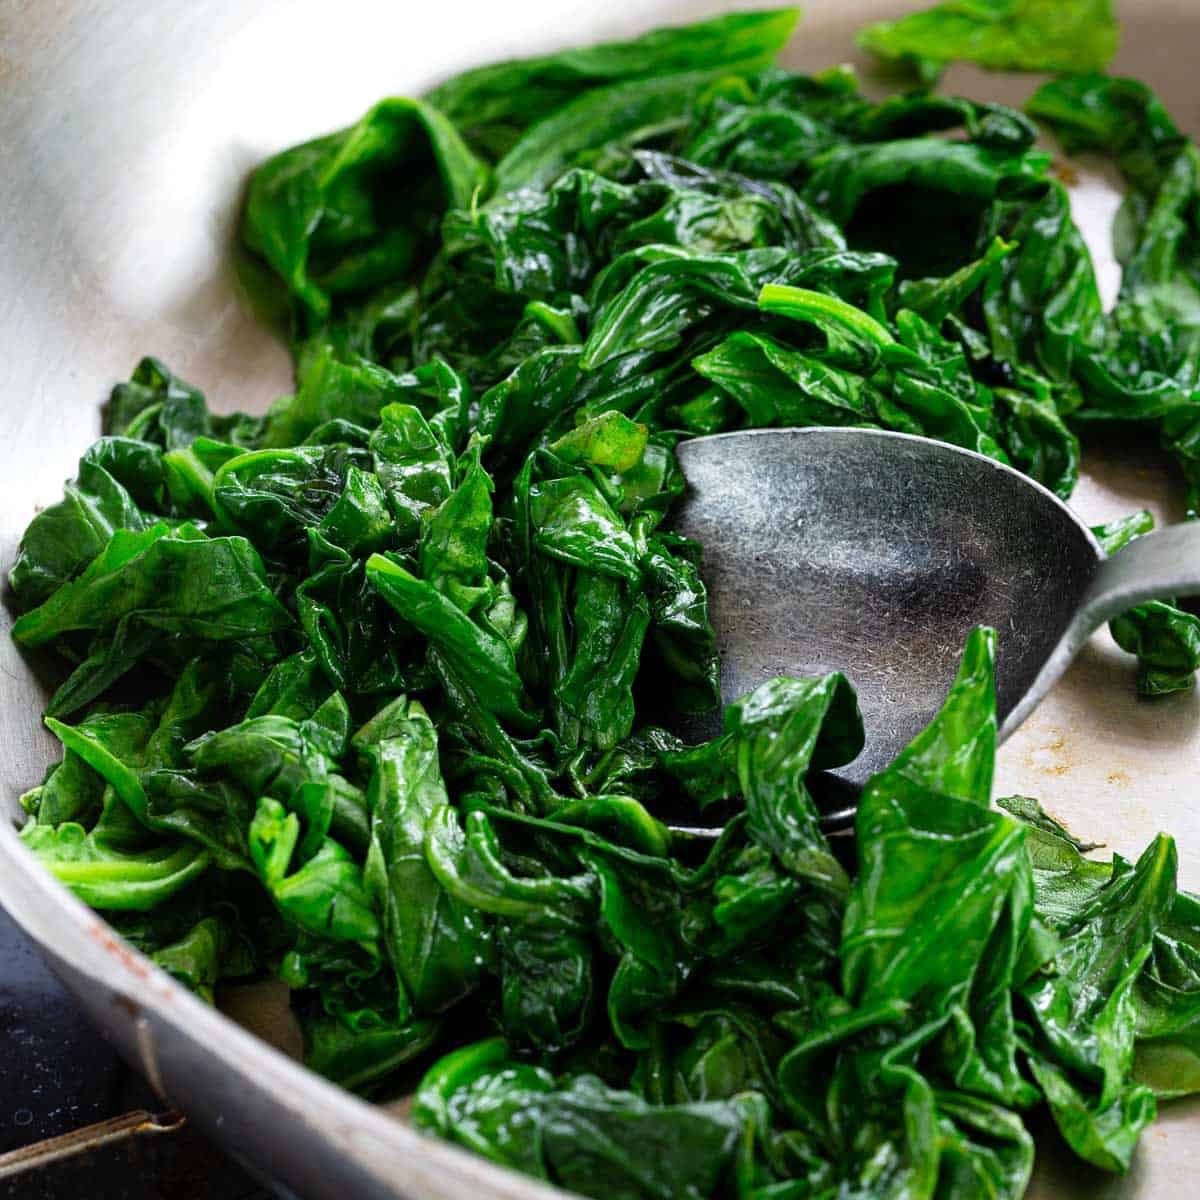 Spinach Spinach is rich in vitamin K, a powerhouse nutrient when it comes to improving blood circulation and coagulation. Spinach is also loaded with zinc, which has been shown to help reduce inflammation and help prevent acne breakouts